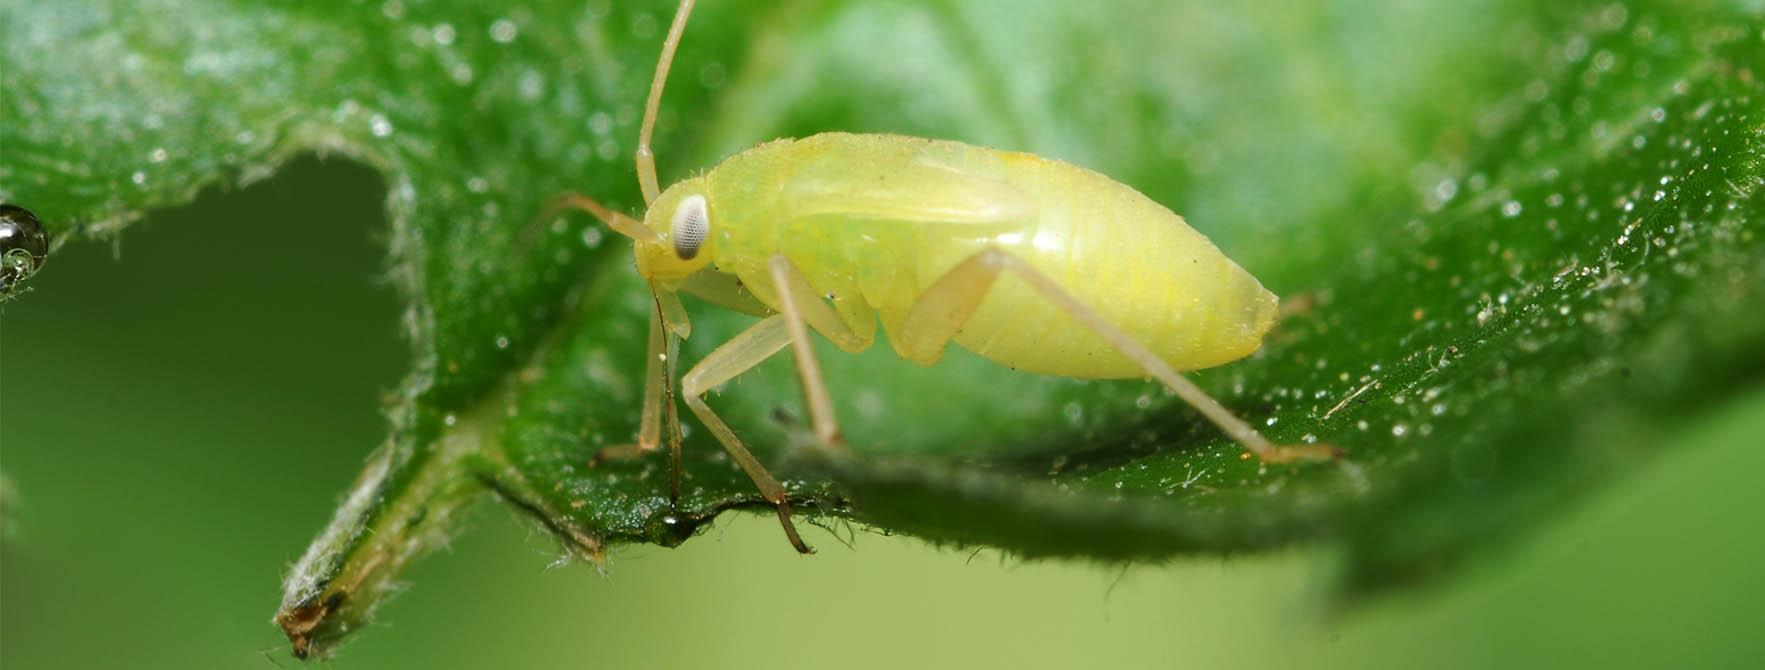 Top 7 Gardening Experts on Common Garden Pests and Natural Pests Control